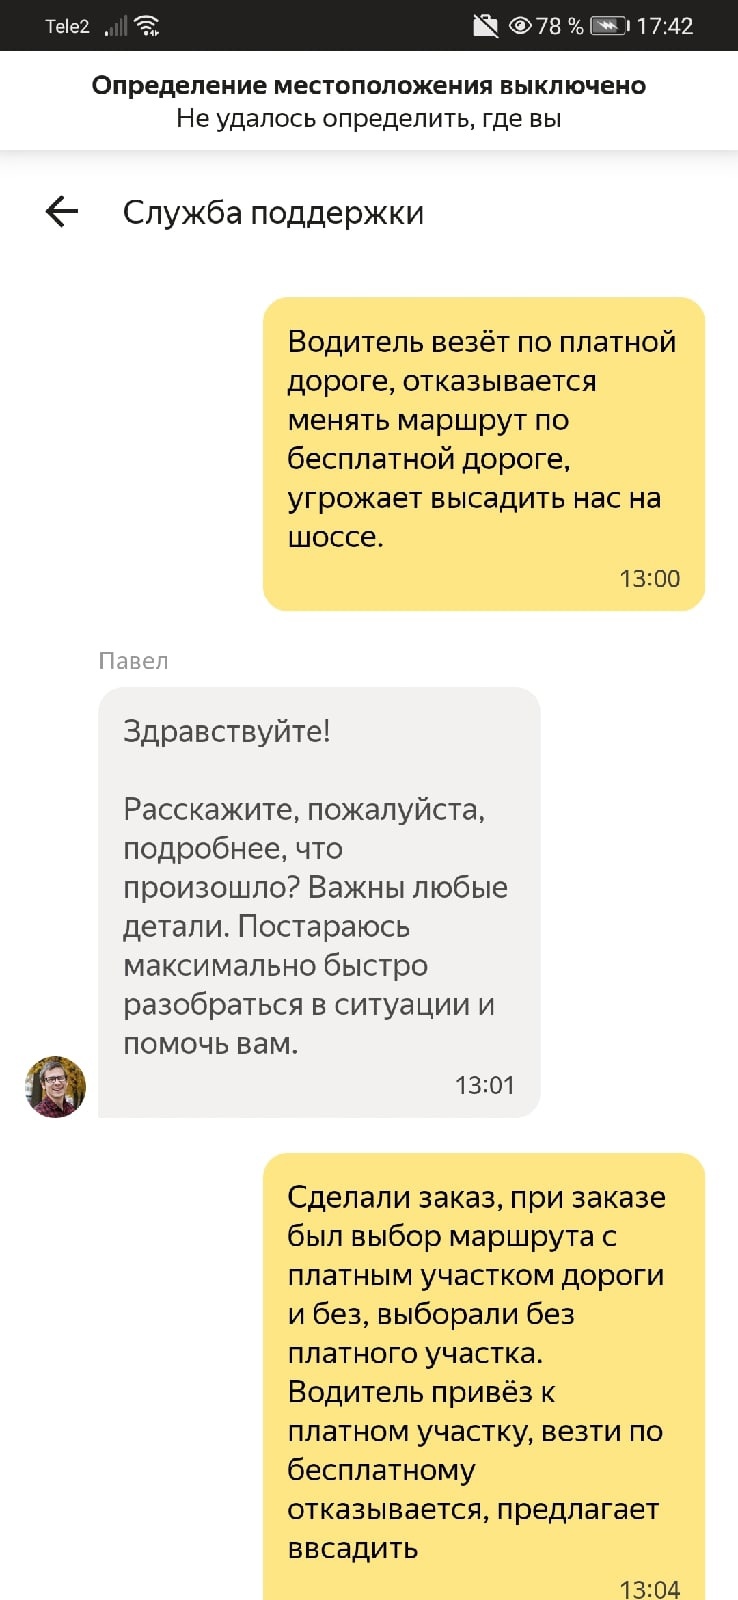 How another moonduck drove me and my wife and how technical support helped me - My, Taxi, Yandex Taxi, Yandex., Driver, Scandal, Bad service, Support service, Mat, Longpost, , Negative